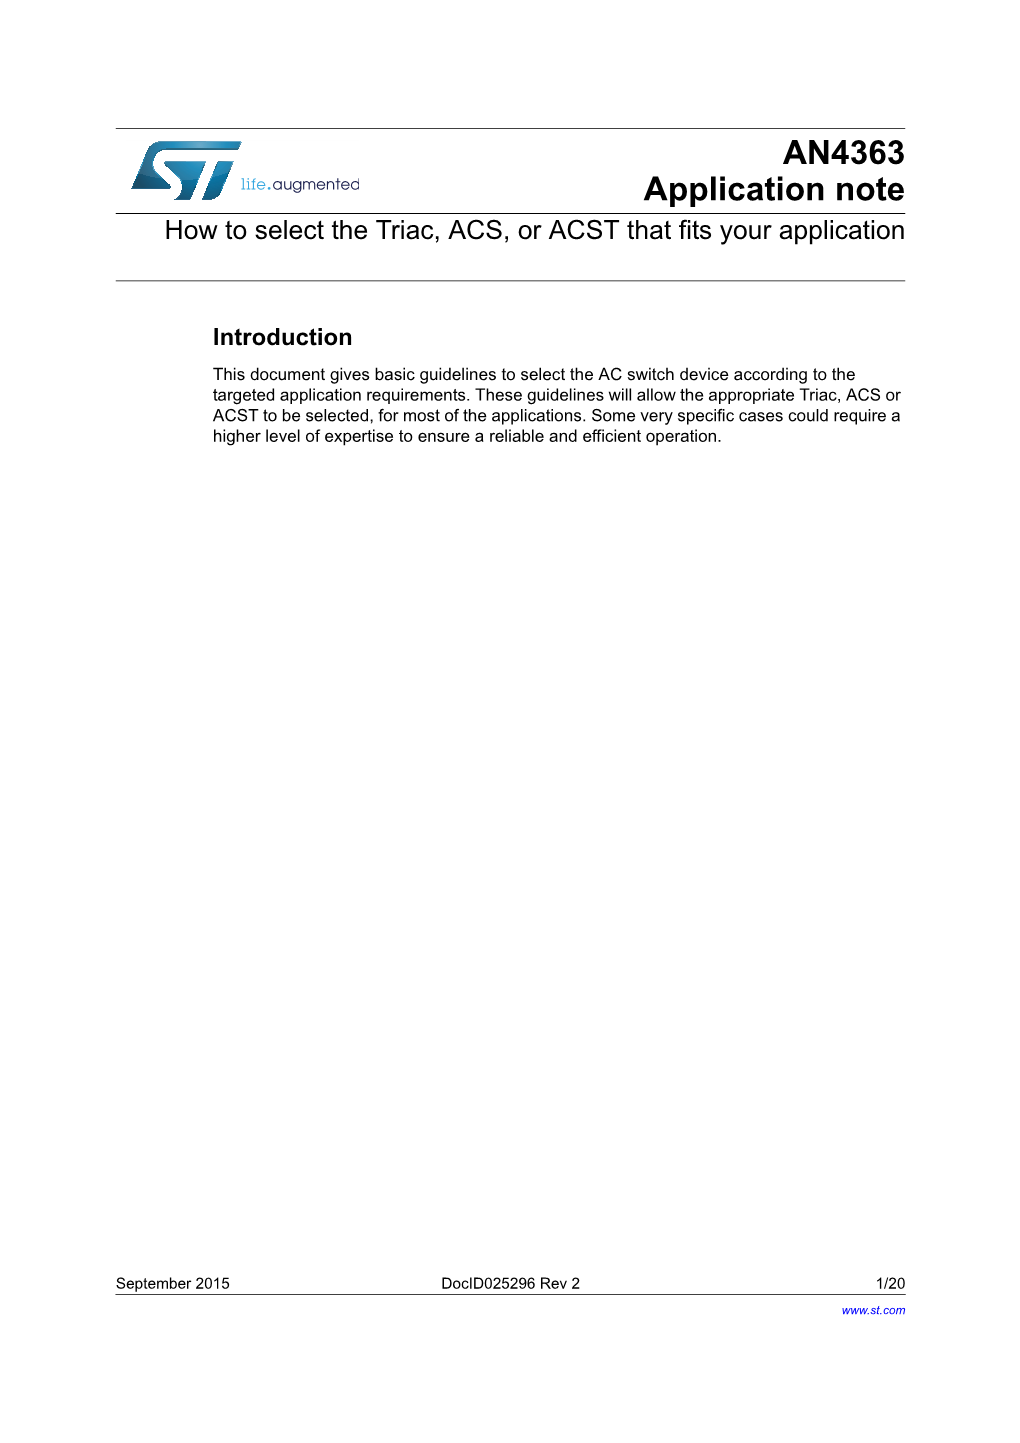 AN4363 Application Note How to Select the Triac, ACS, Or ACST That Fits Your Application